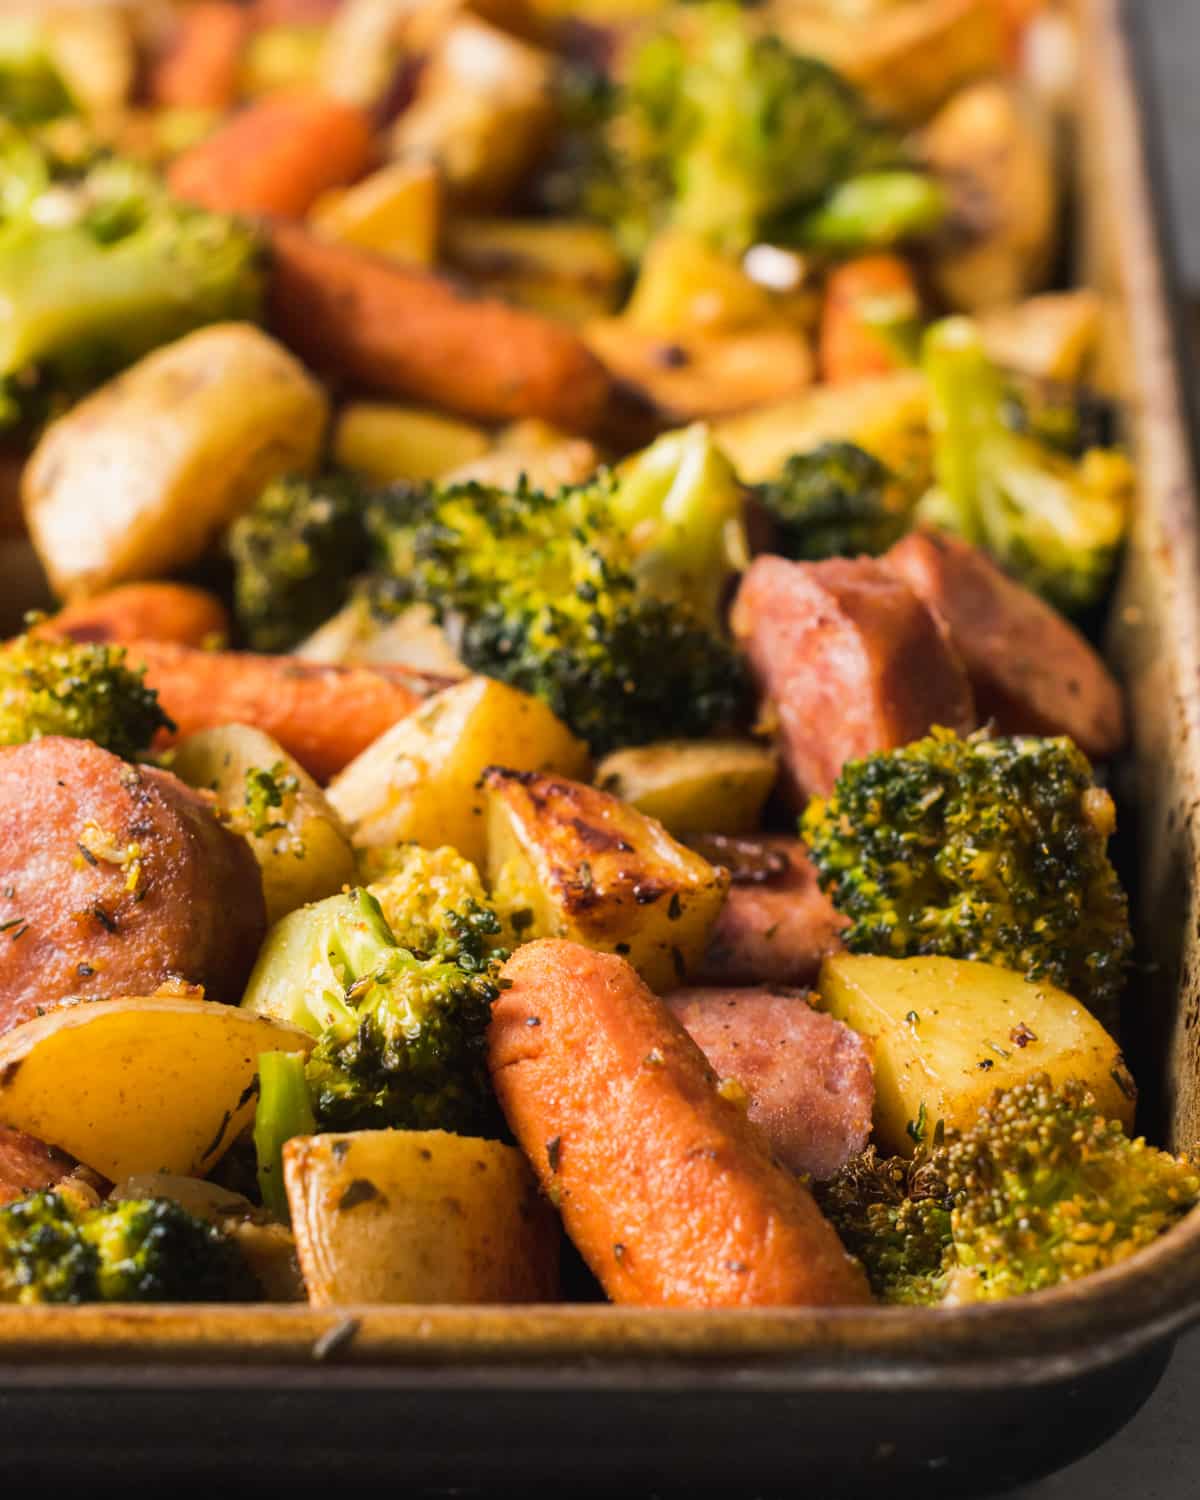 Baked sausage and vegetables on a sheet pan.